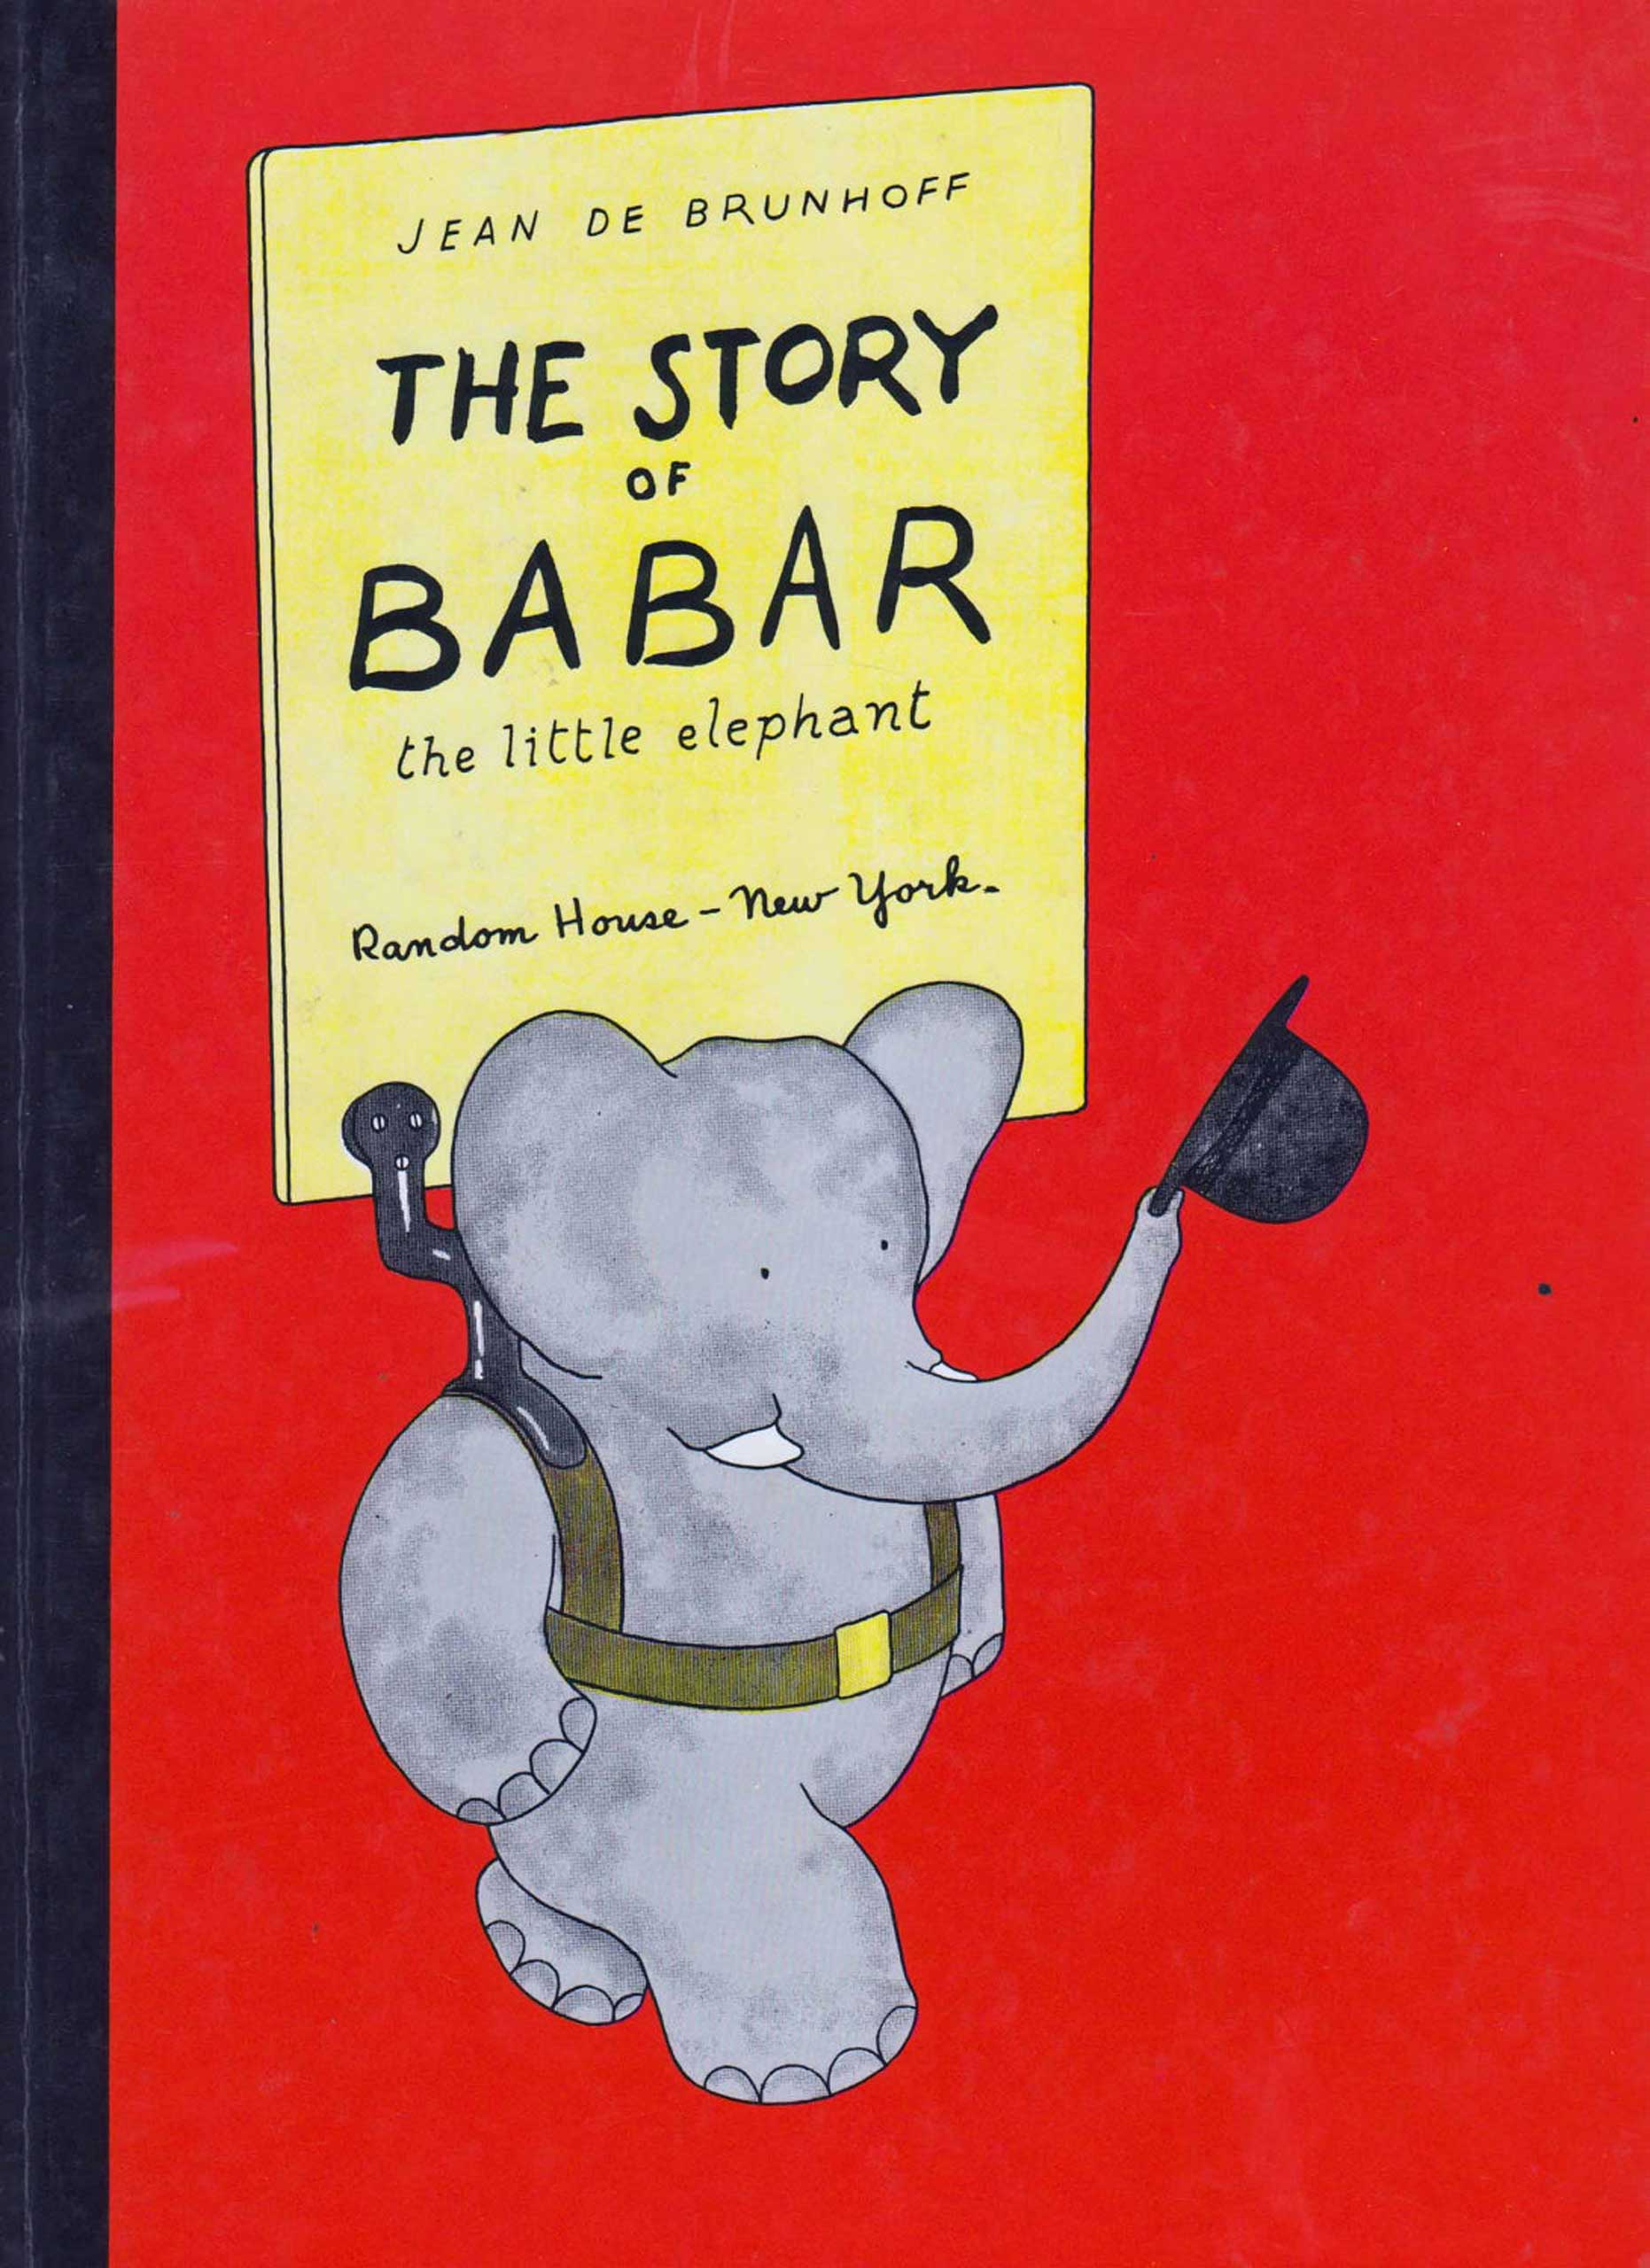 Best Children's Books: The Story of Babar